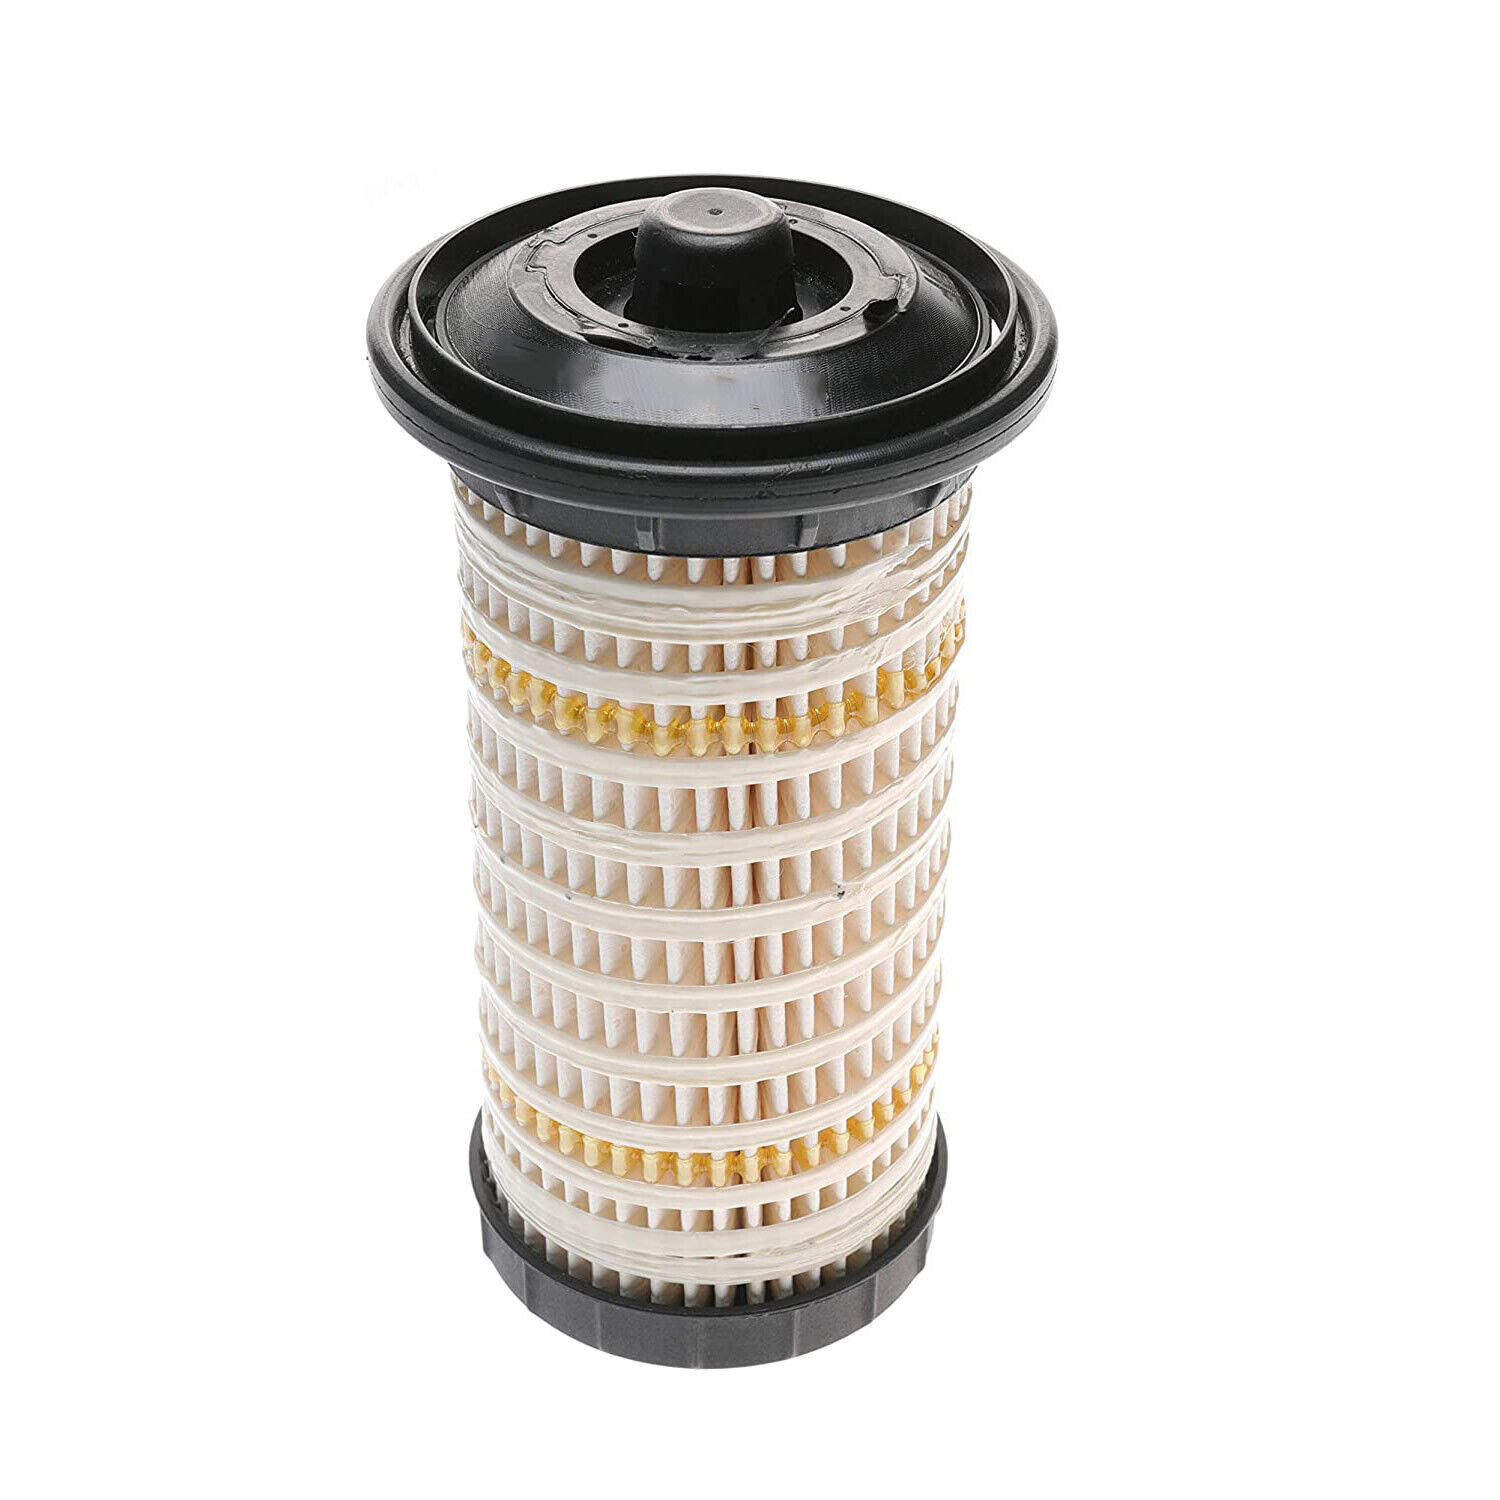 3611274 Fuel Filter Fixed Max 42% OFF price for sale Element For Perkins 1200 854F-E34T Engine 850 1100 Series